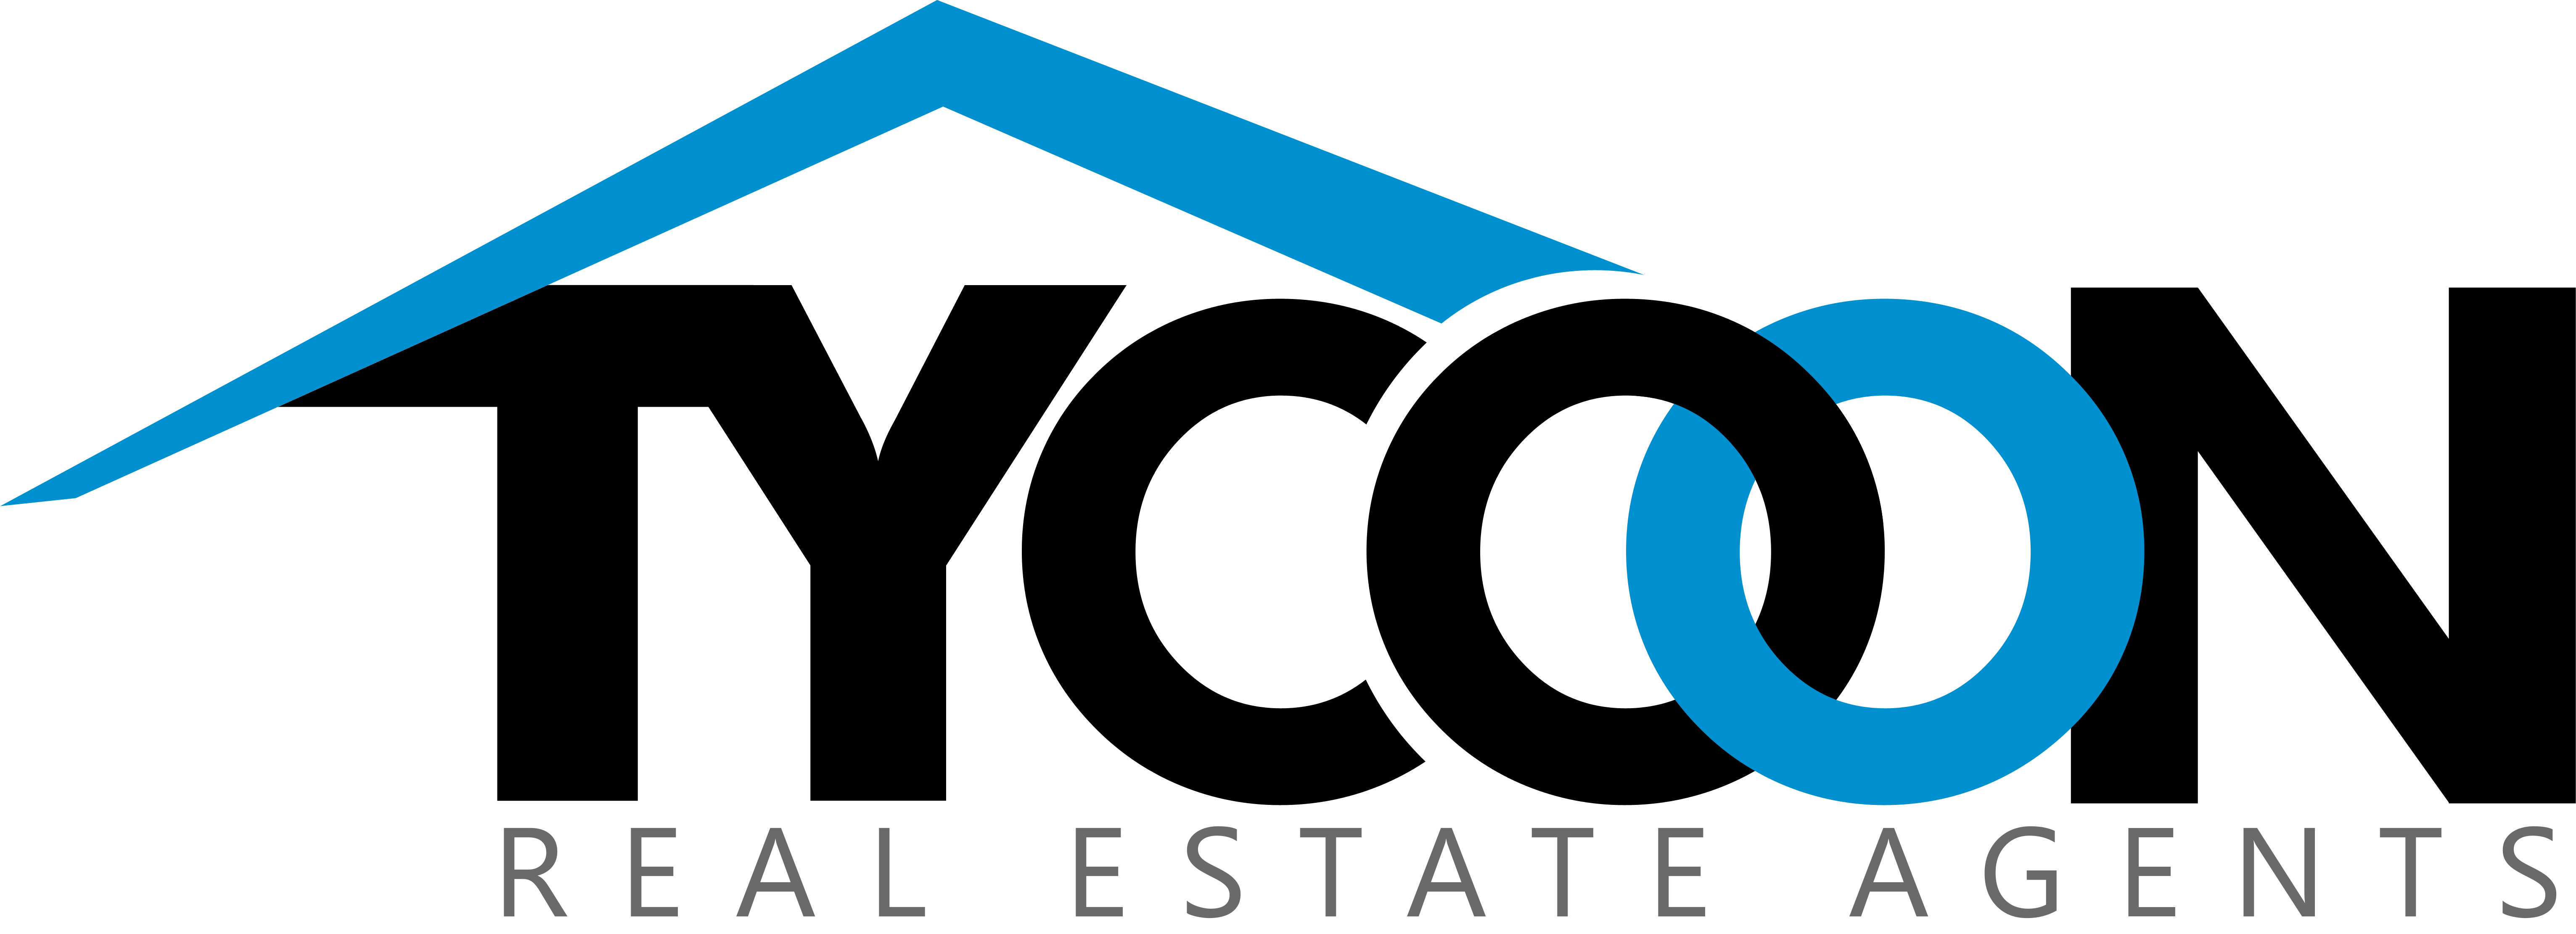 Tycoon Logo - Tycoon Real Estate